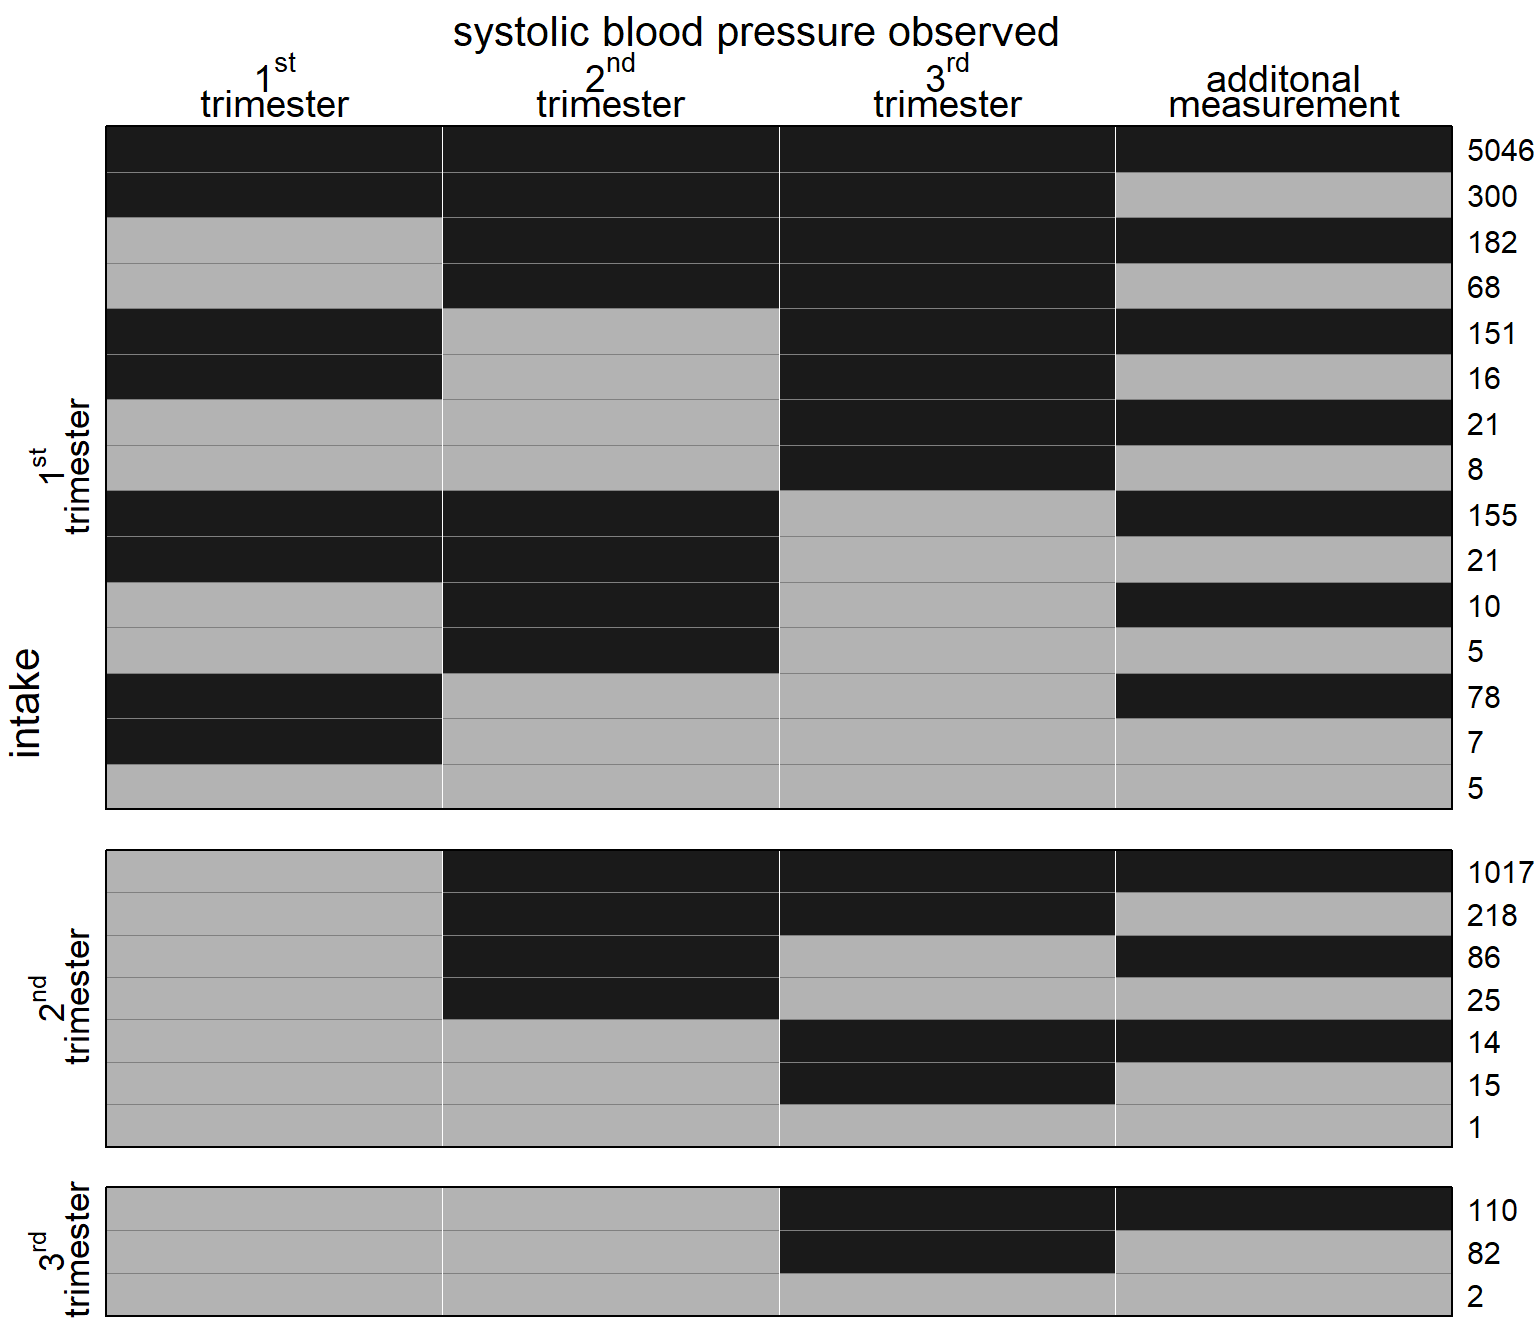 Missing data pattern for systolic blood pressure. 
Dark color depicts observed values, light color missing values.
The frequency of each missing data pattern is given on the right.